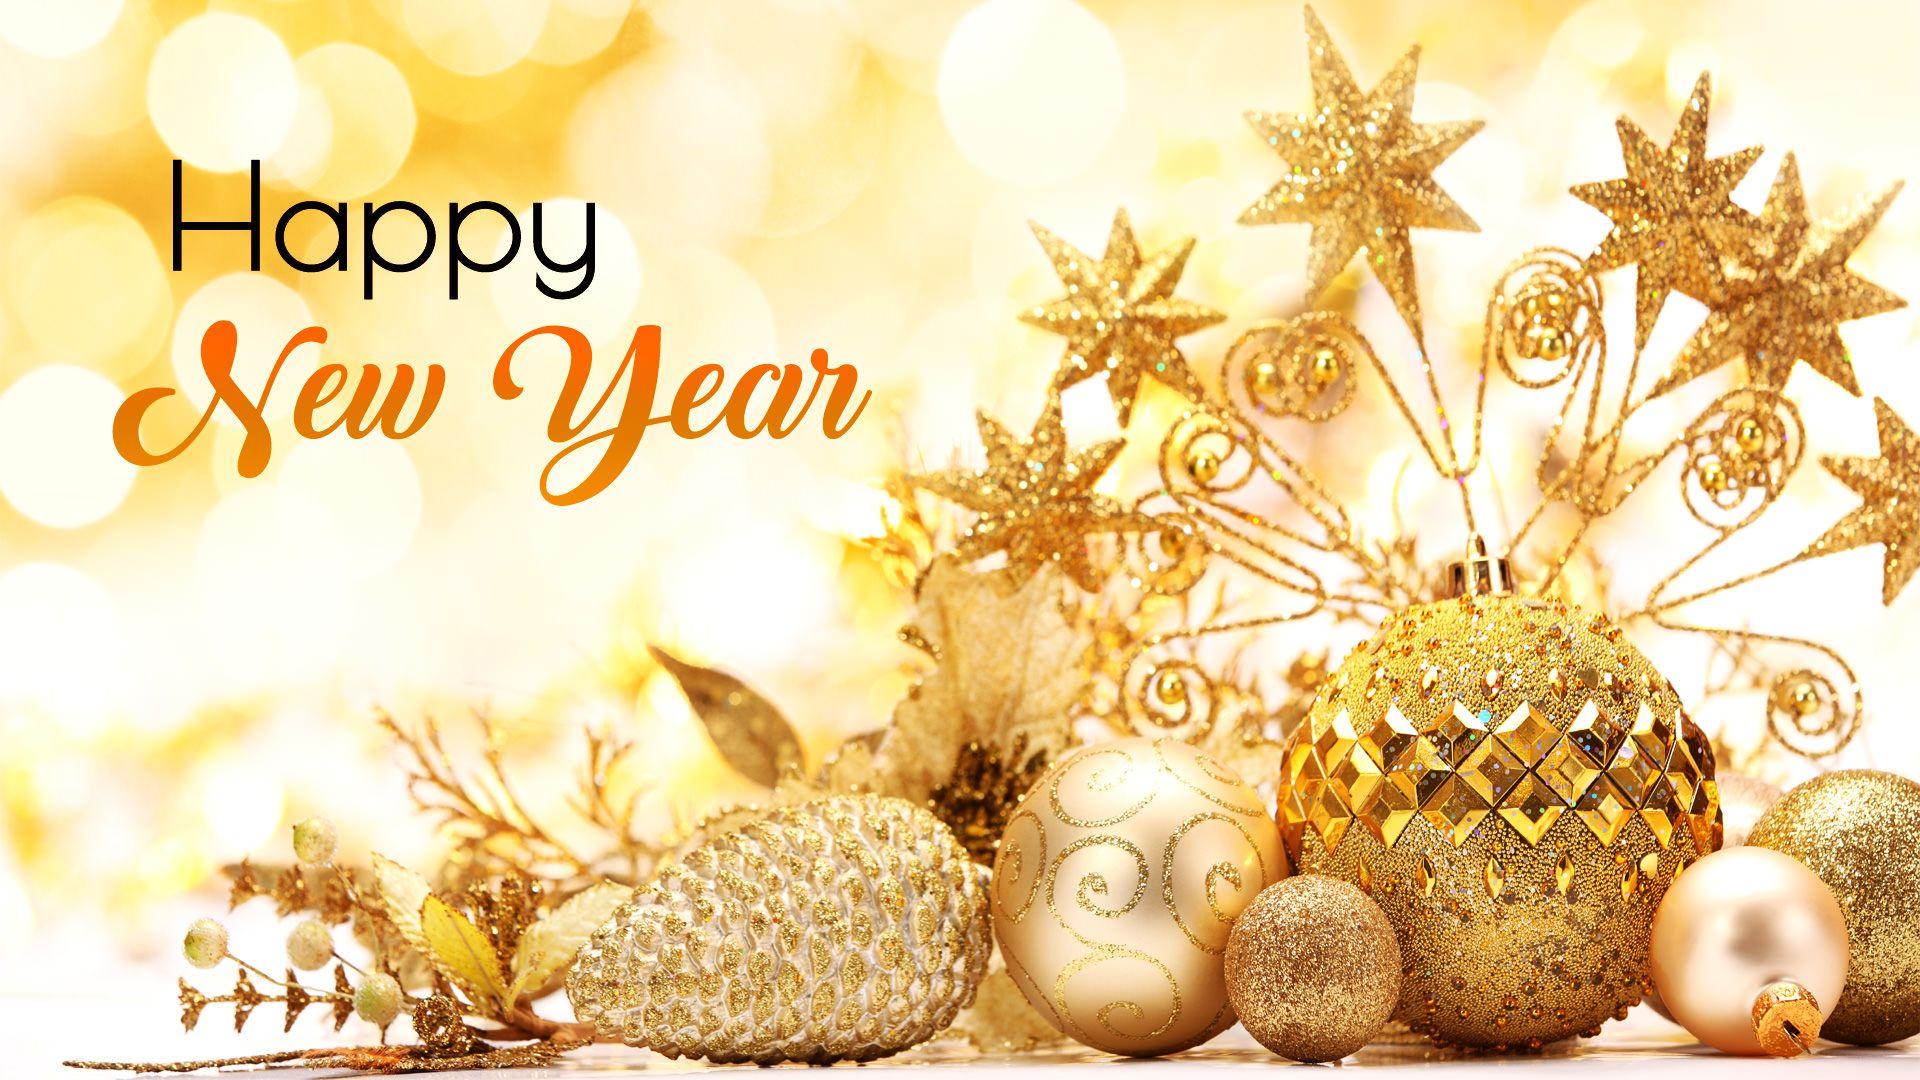 Happy New Year 1920x1080 Wallpapers - Wallpaper Cave